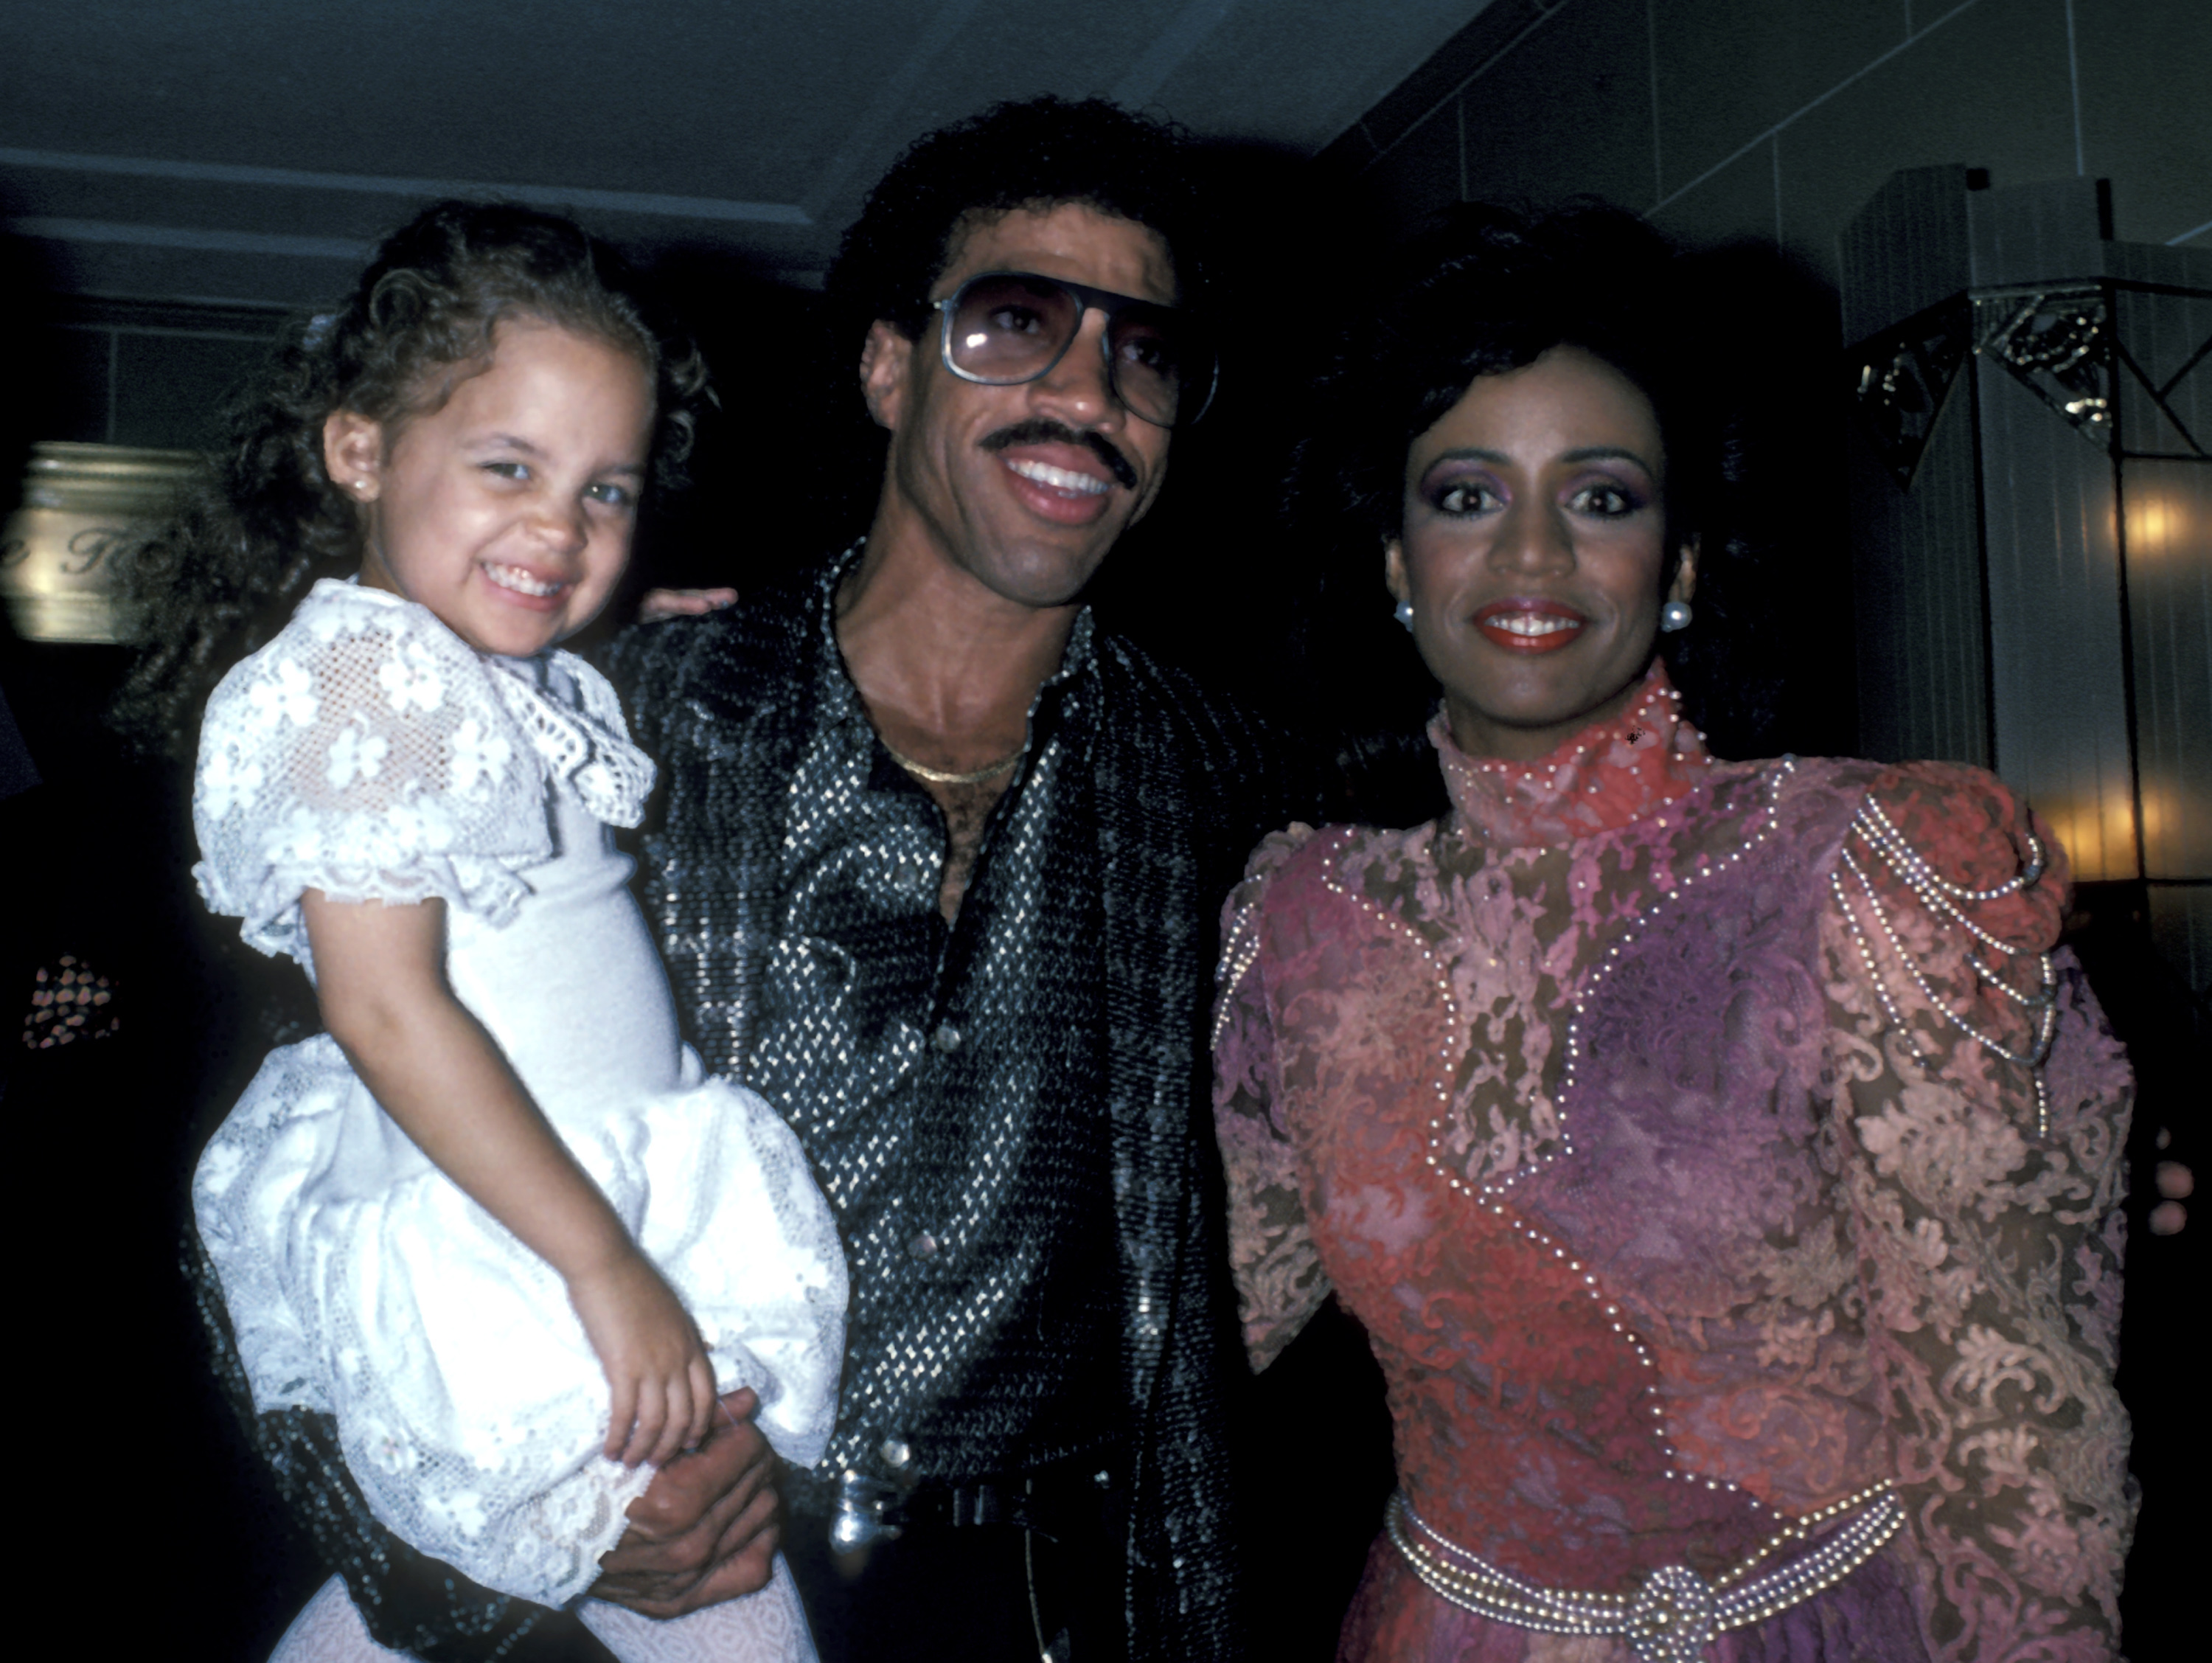 Nicole Richie, Lionel Richie, and Brenda Harvey Richie in New York City on September 05, 1985 | Source: Getty Images